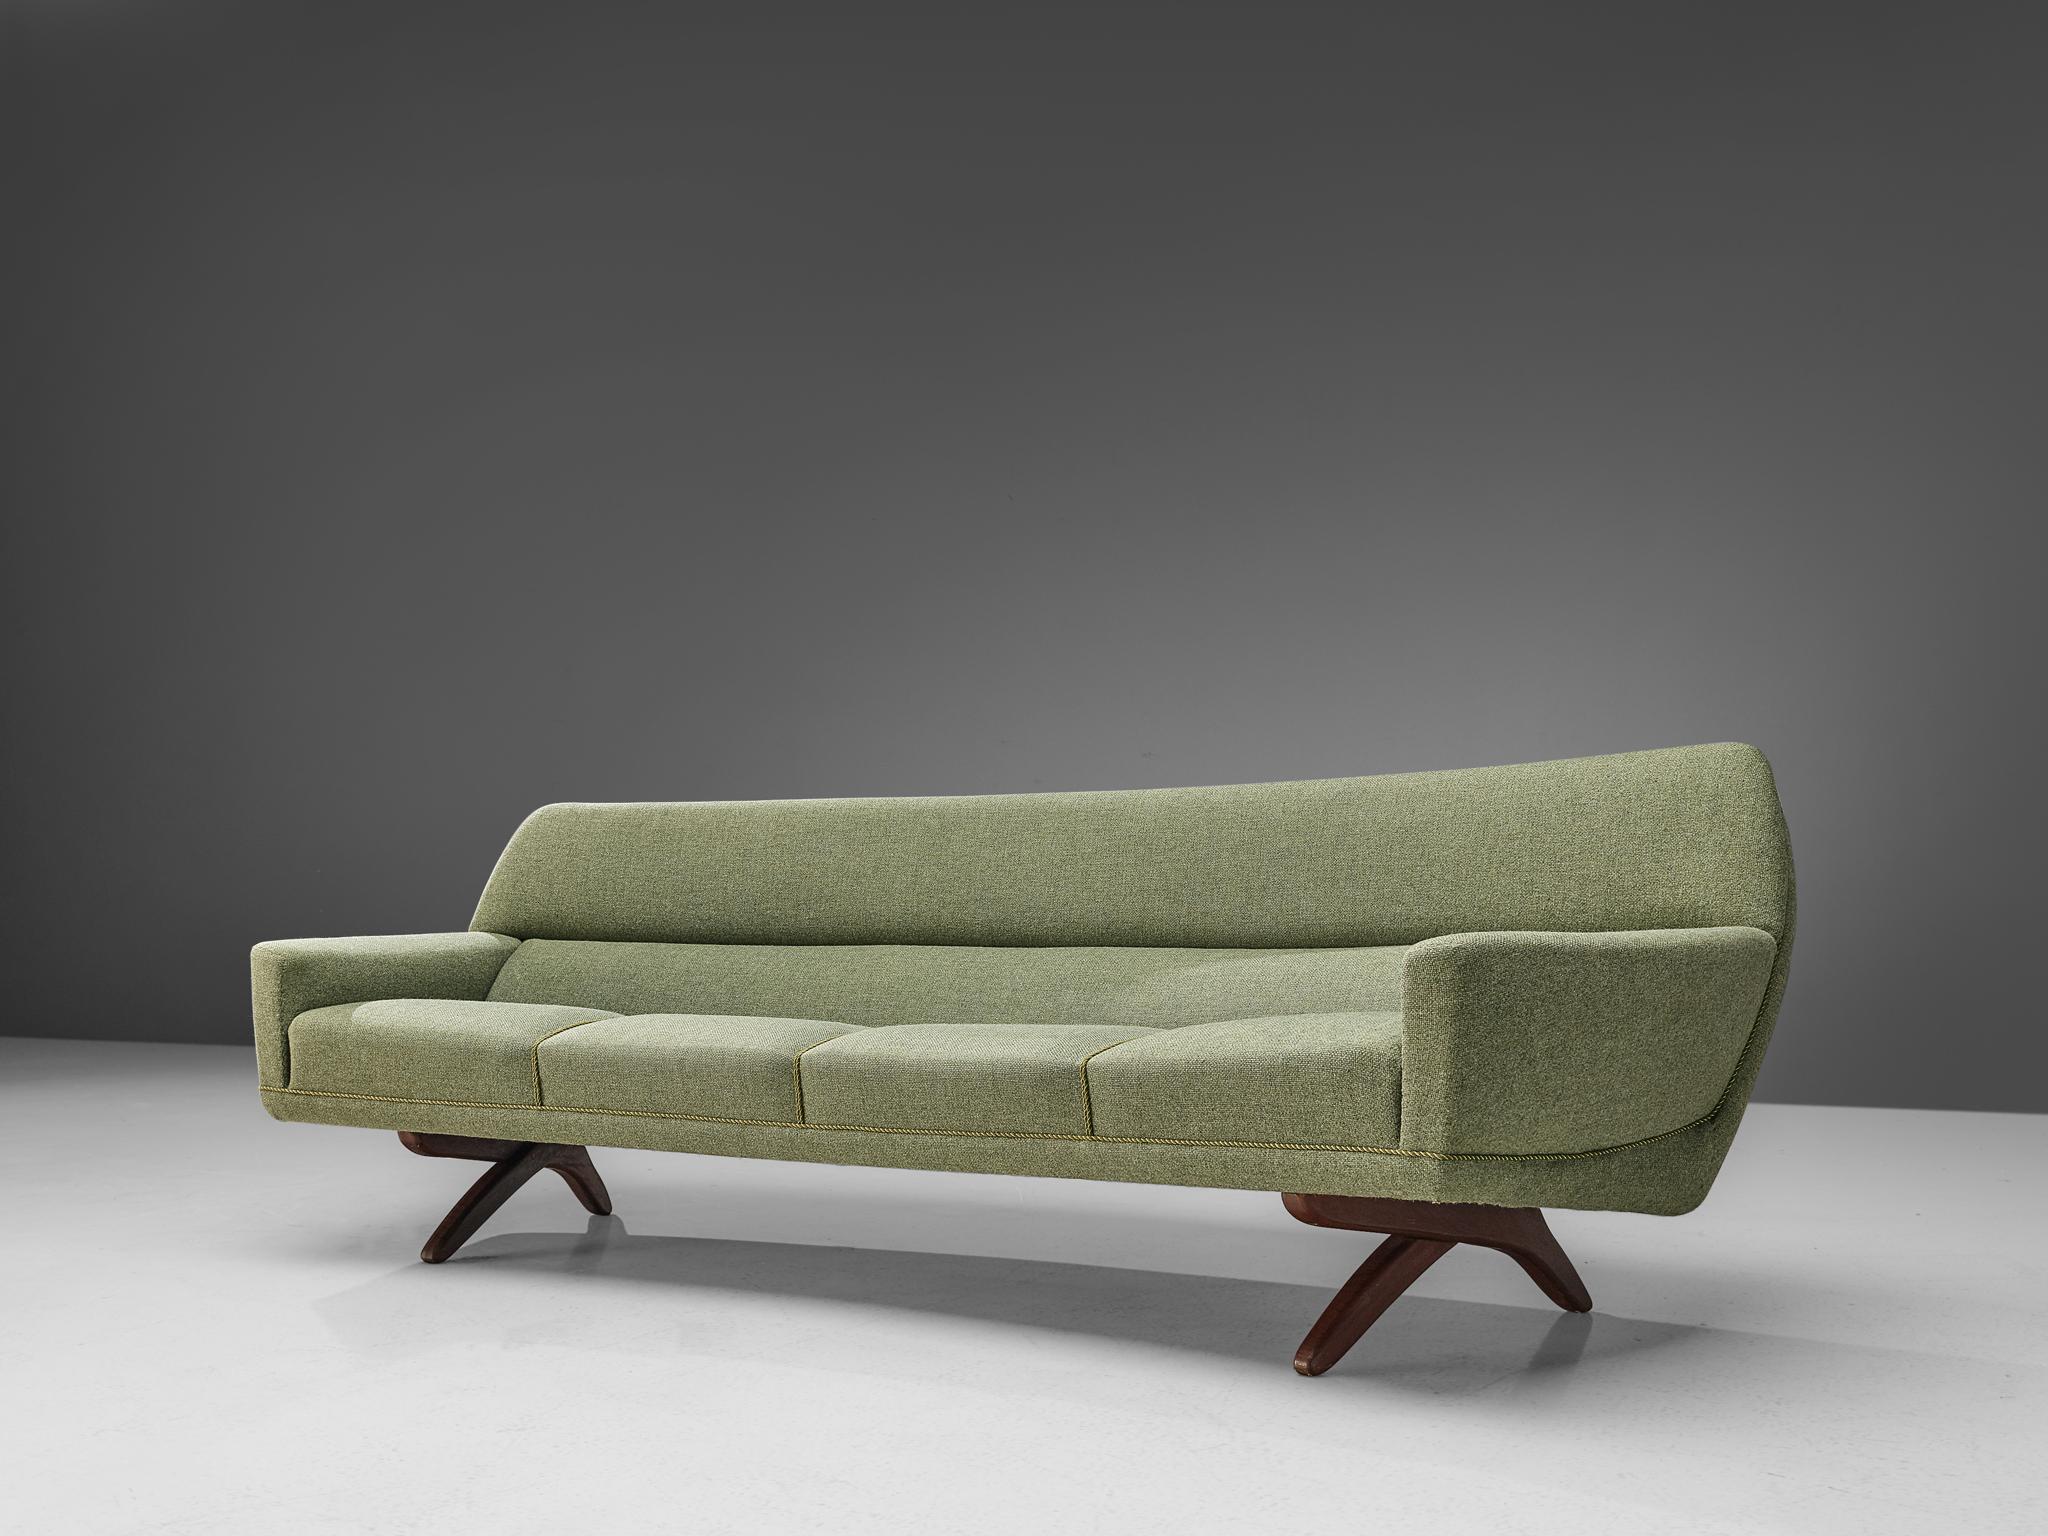 Leif Hansen for Kronen Møbelfabrik, four-seat sofa, green woolen upholstery and teak, Denmark, 1965.  

This sofa is characterized by a splendid design that epitomizes a simplistic, natural and timeless aesthetics. The whole unit is well-designed